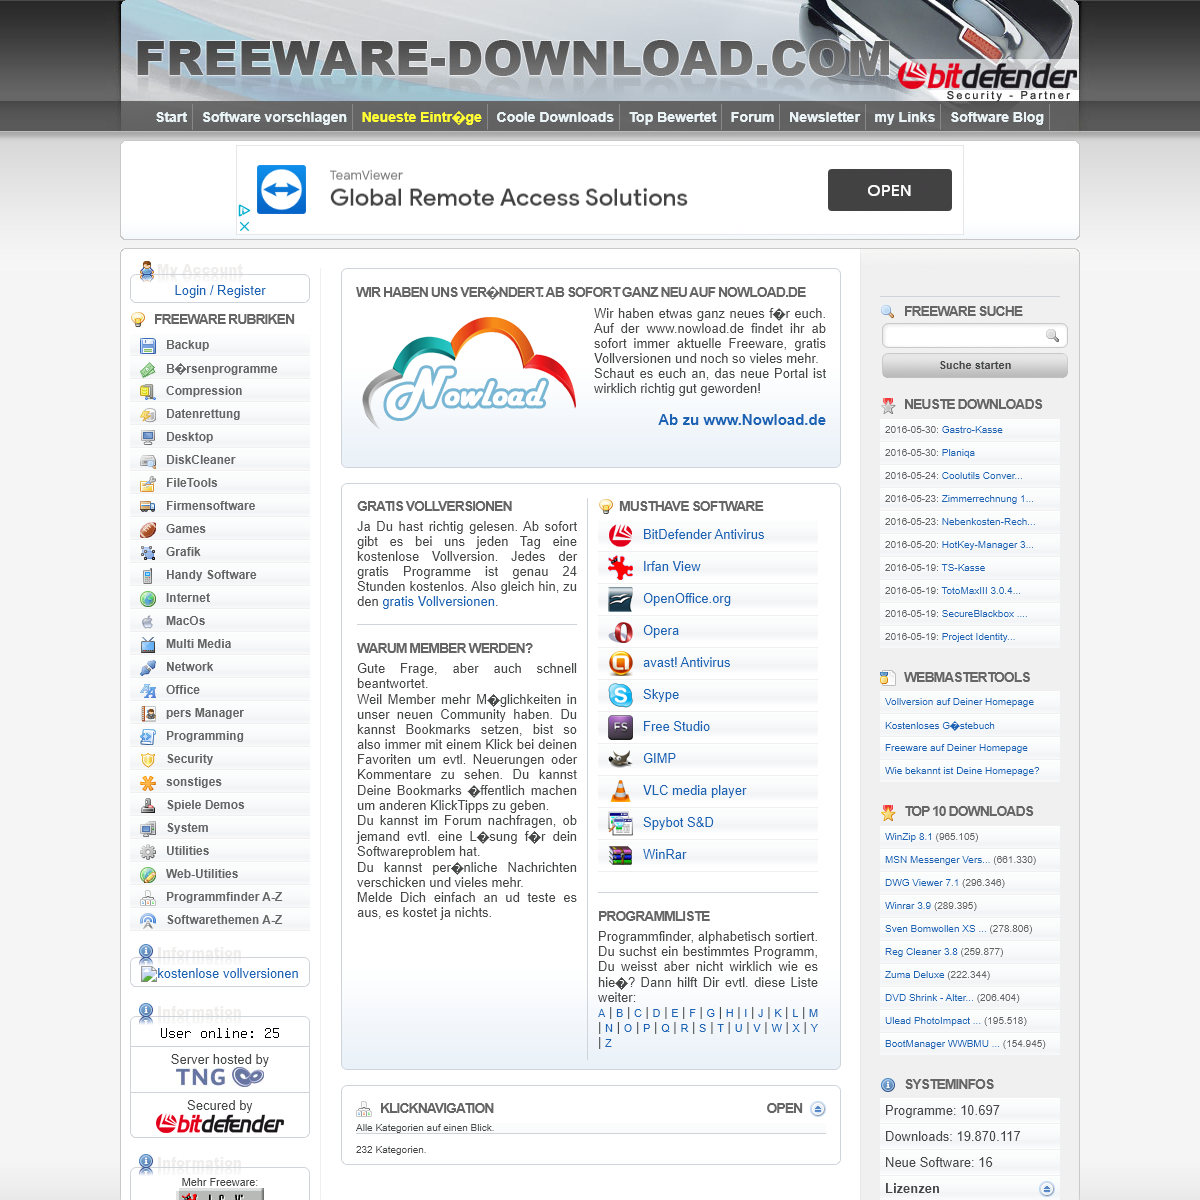 A complete backup of freeware-download.com